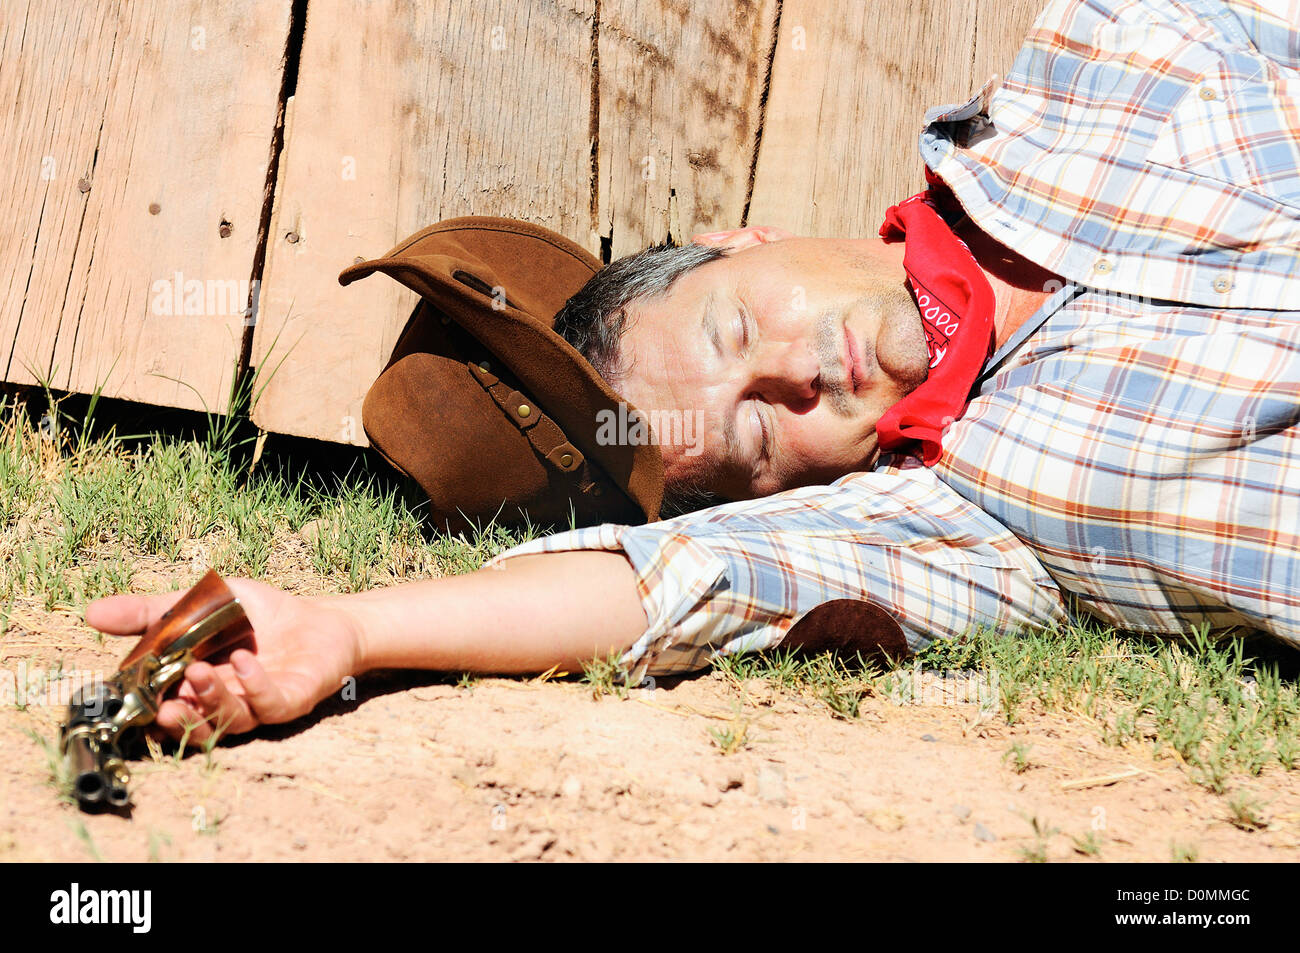 OUT WEST - A cowboy dead with arm in his hand Stock Photo